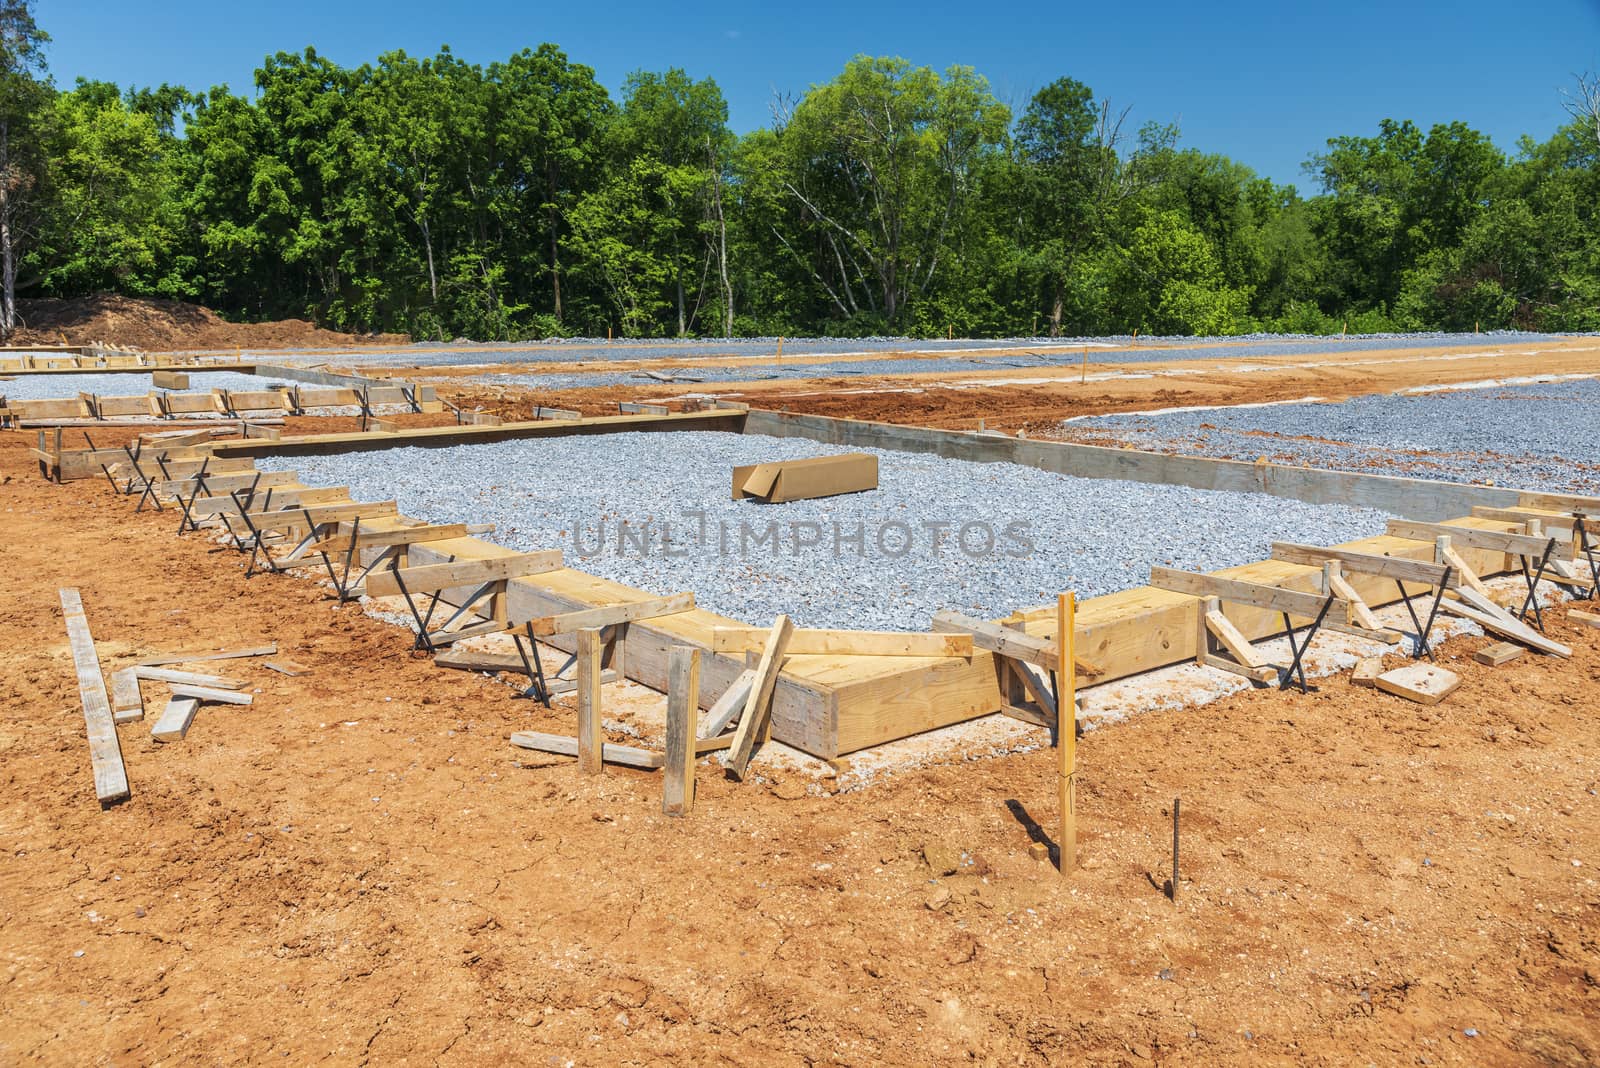 Construction Ground Work For New Commercial Building Complex by stockbuster1